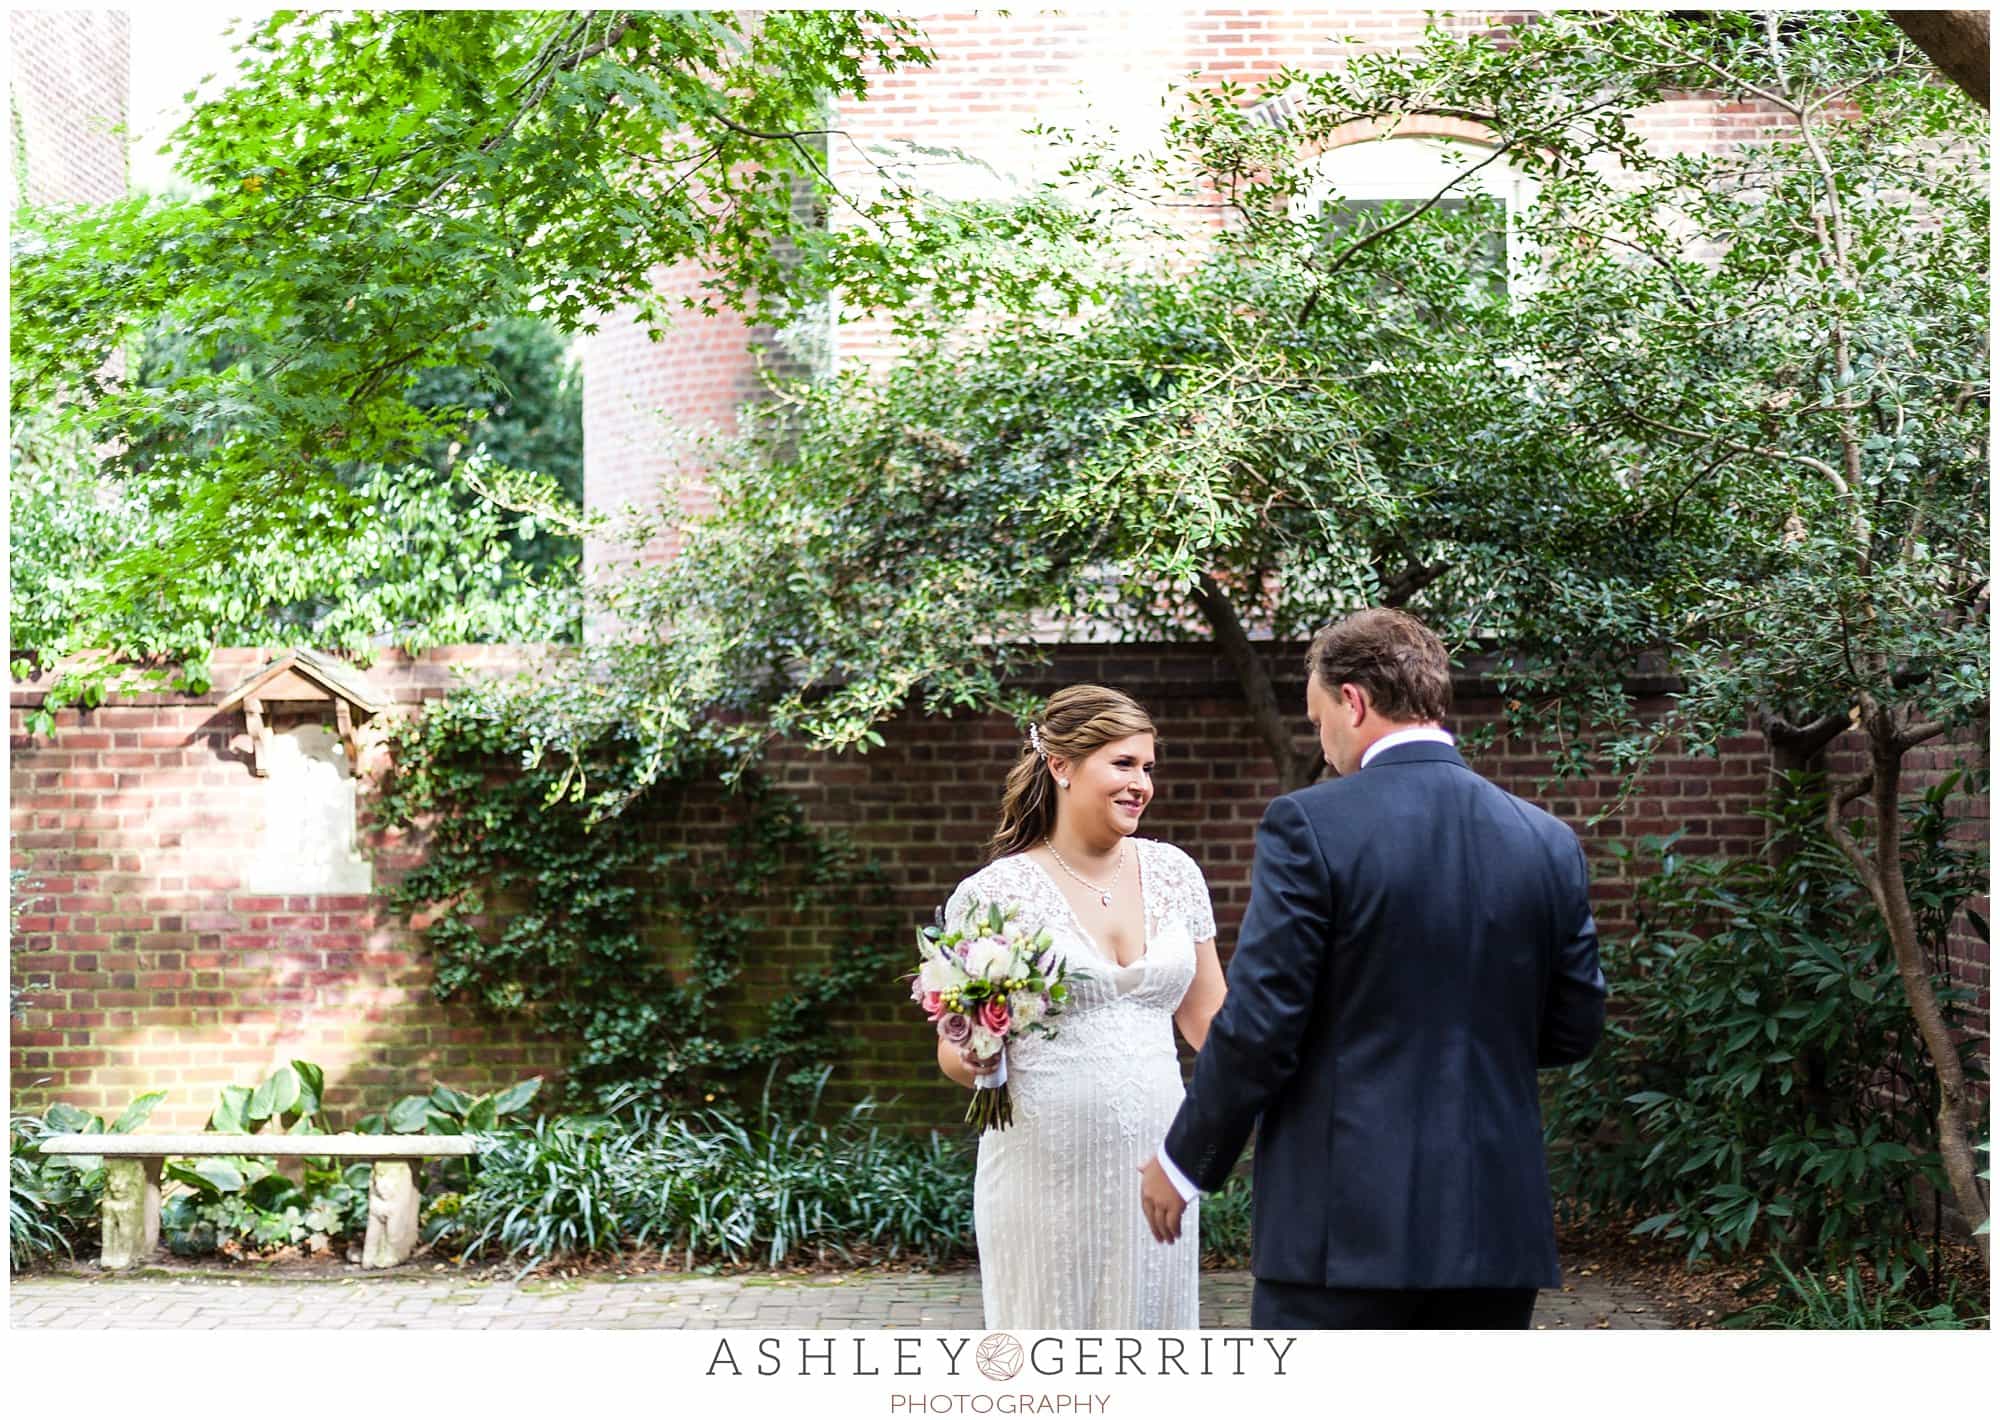 Bride & Groom see each other during their first look in the courtyard at the historic Colonial Dames in Philadelphia, PA